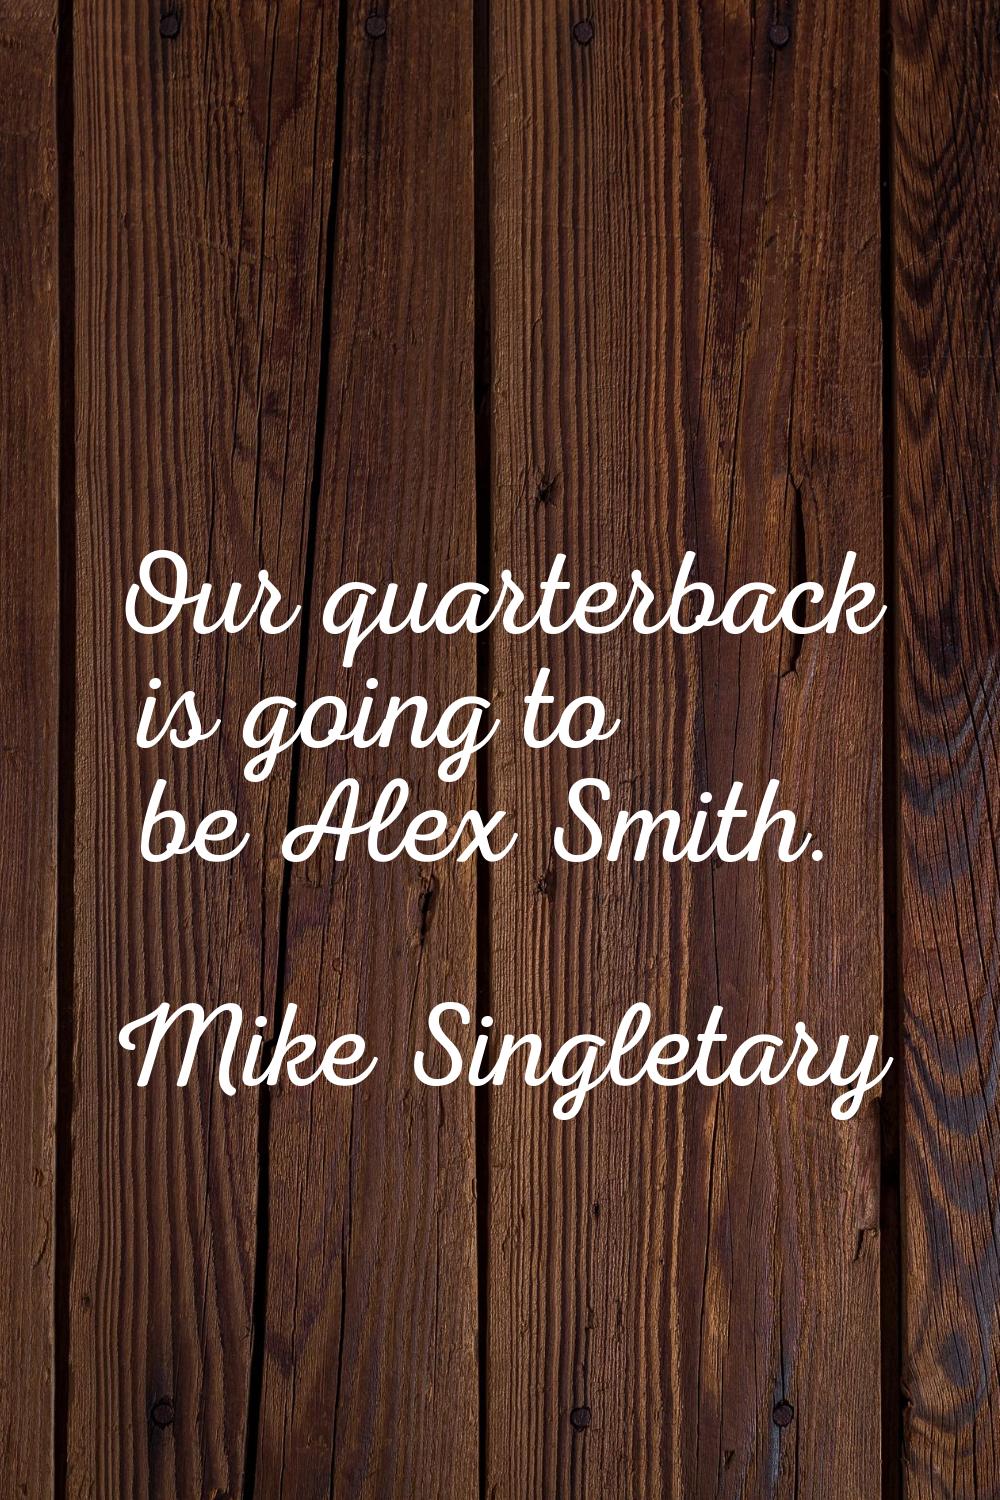 Our quarterback is going to be Alex Smith.